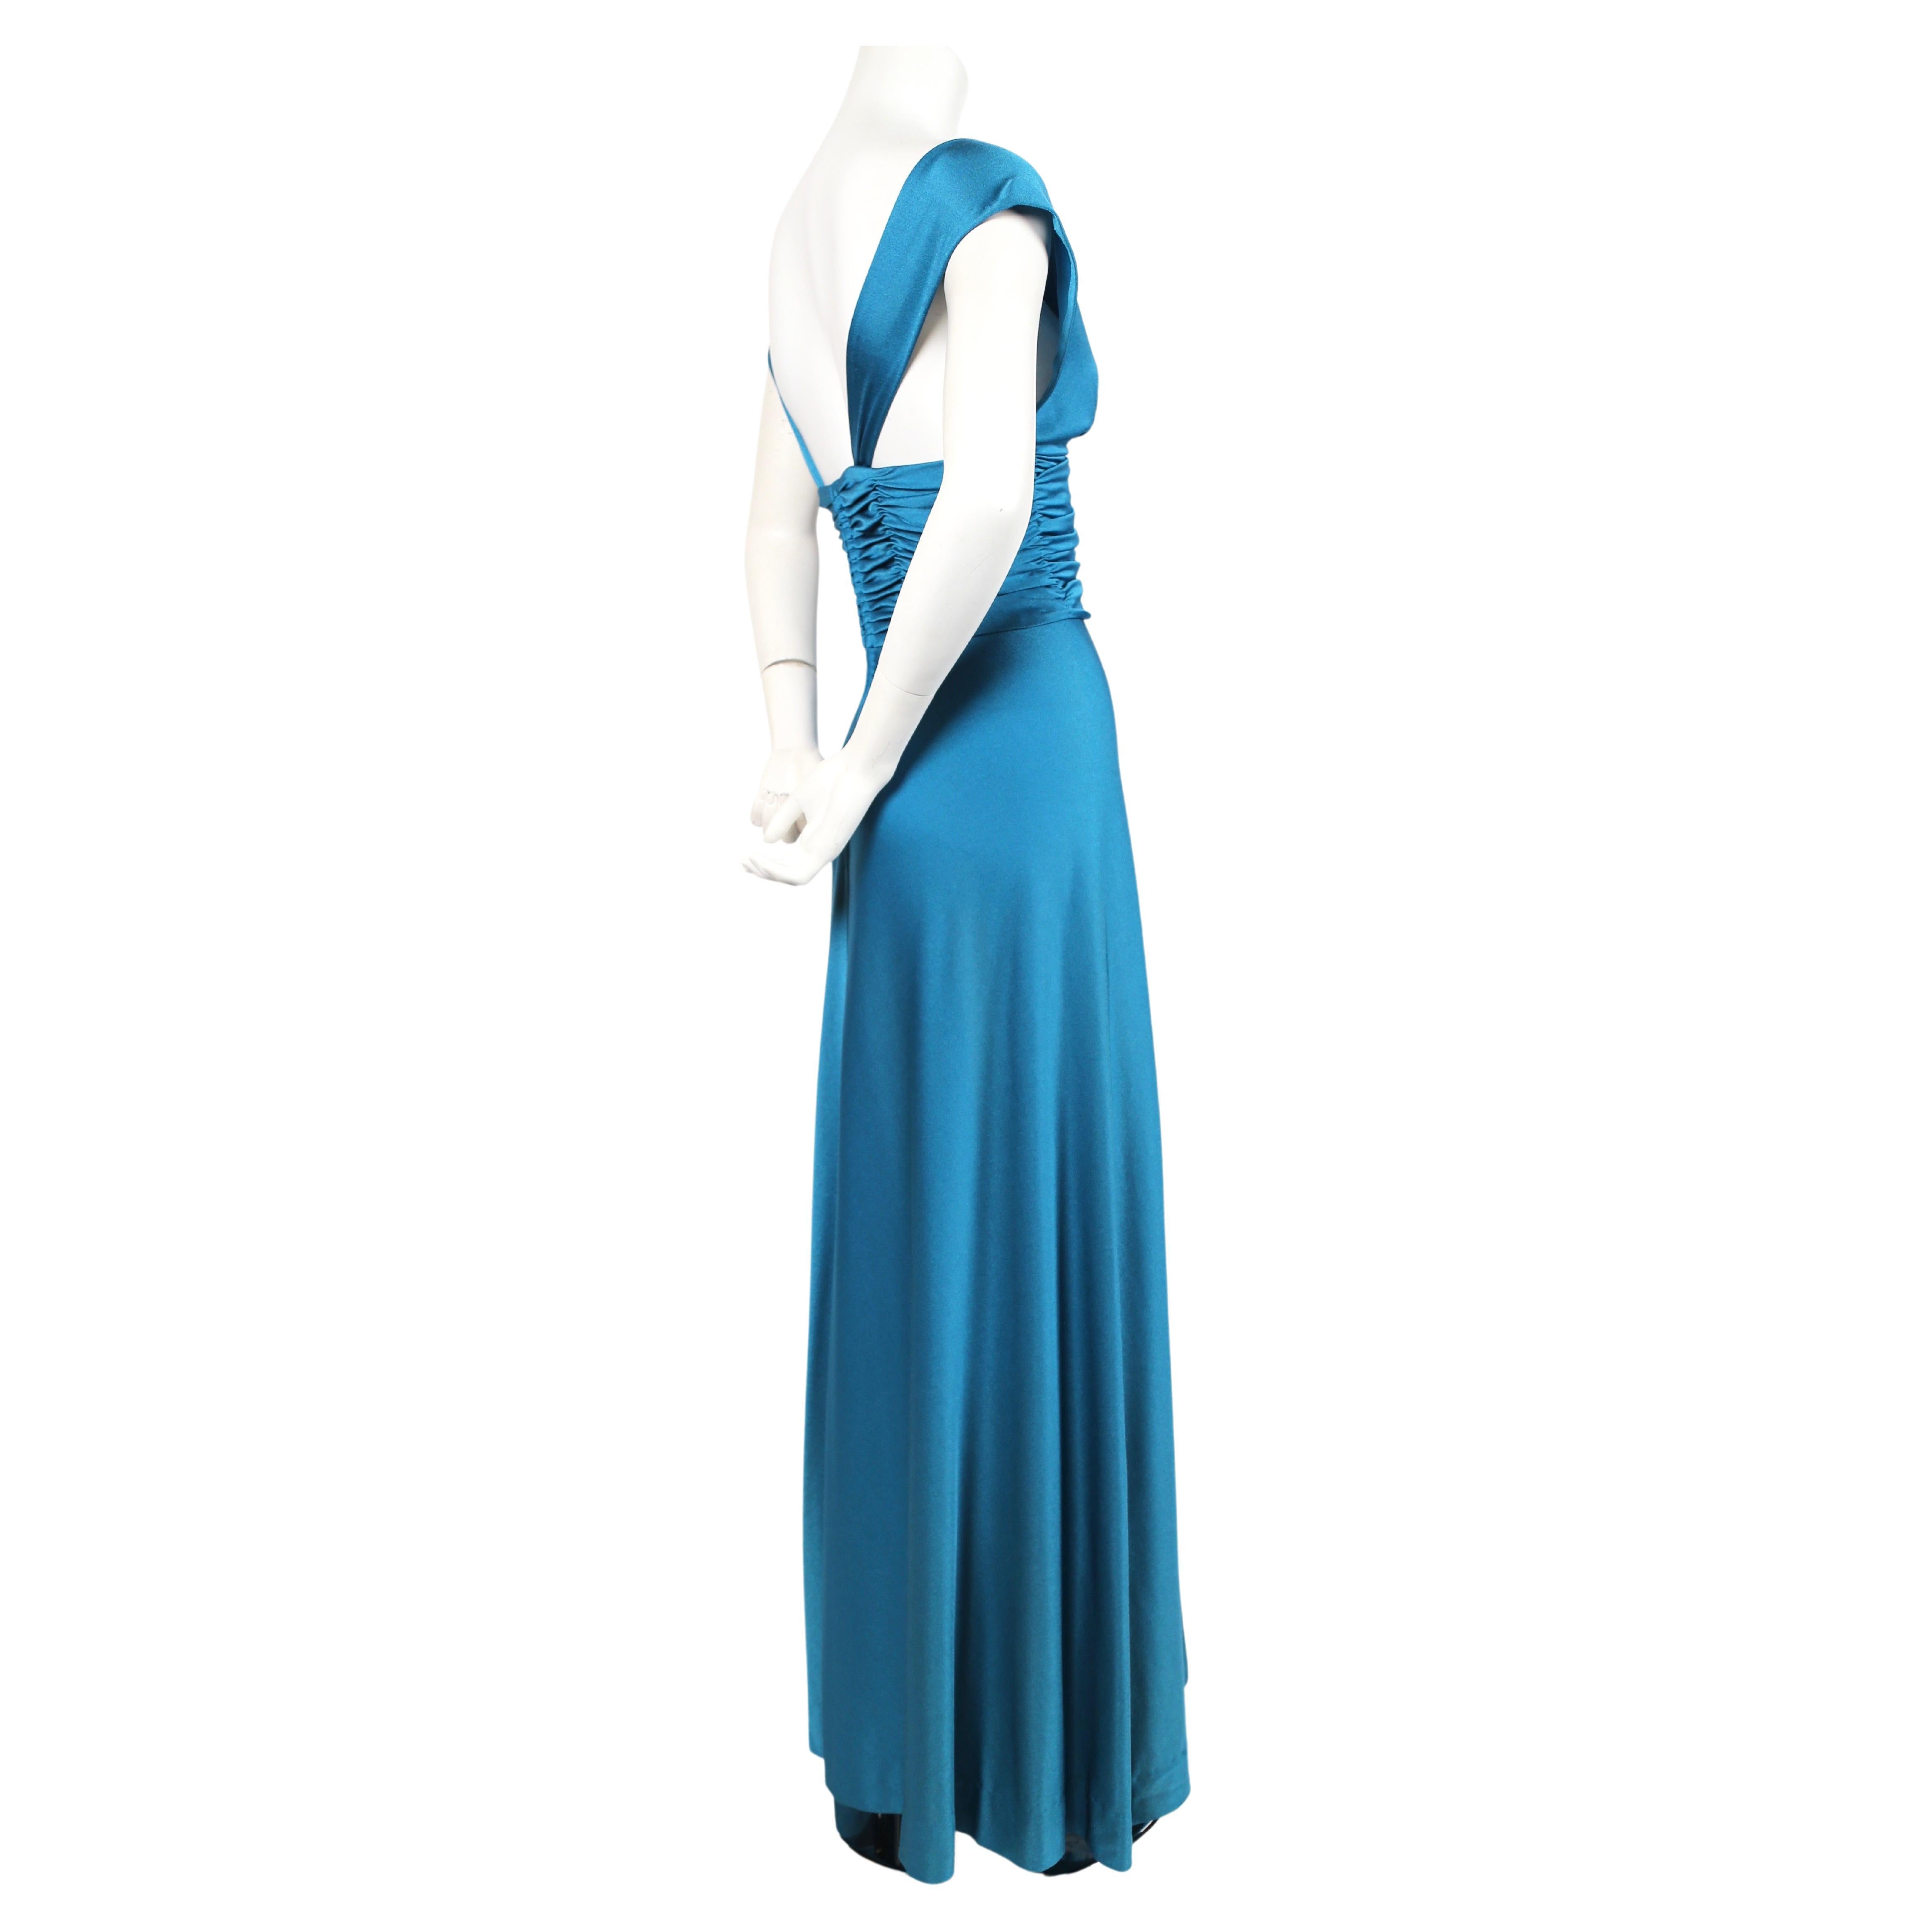 Stunning vivid turquoise blue jersey gown with ruching from Loris Azzaro dating to the 1970's. Dress best fits a size 2-4. Best fits a 32-33